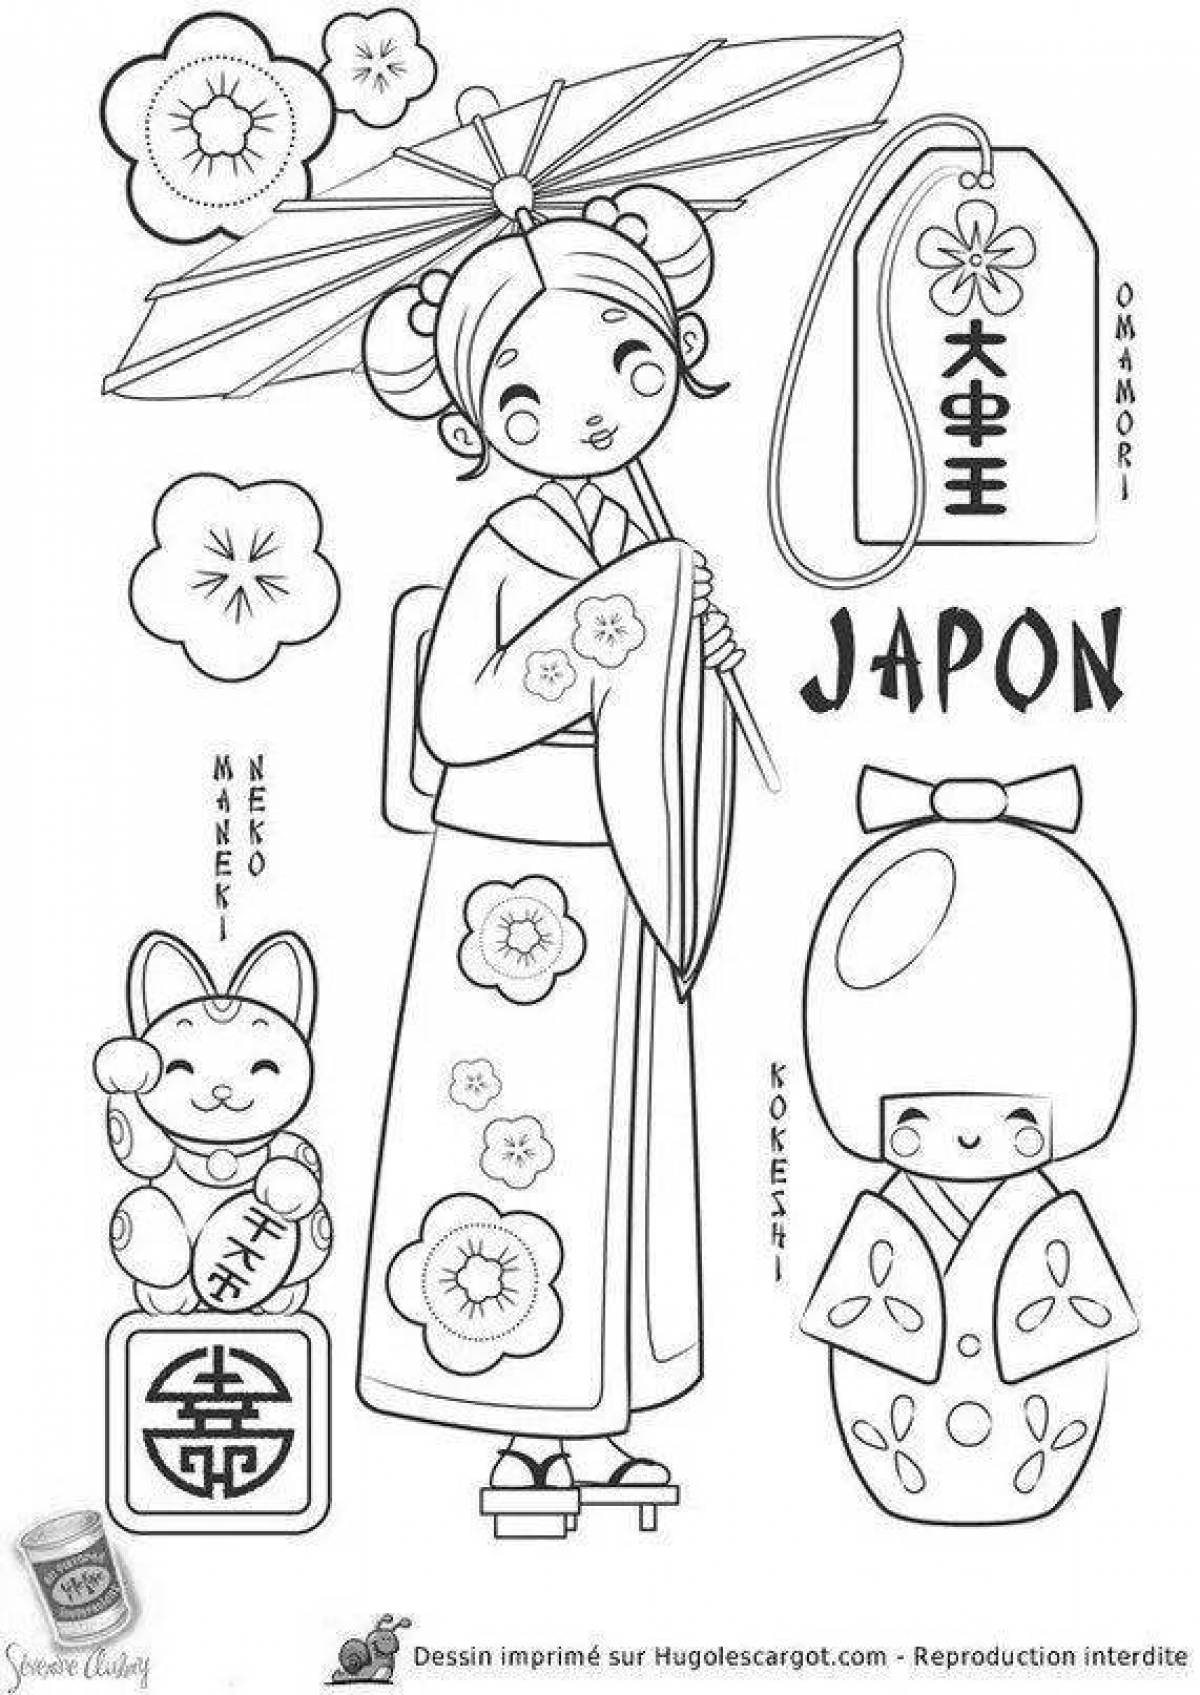 Bright Japanese coloring book